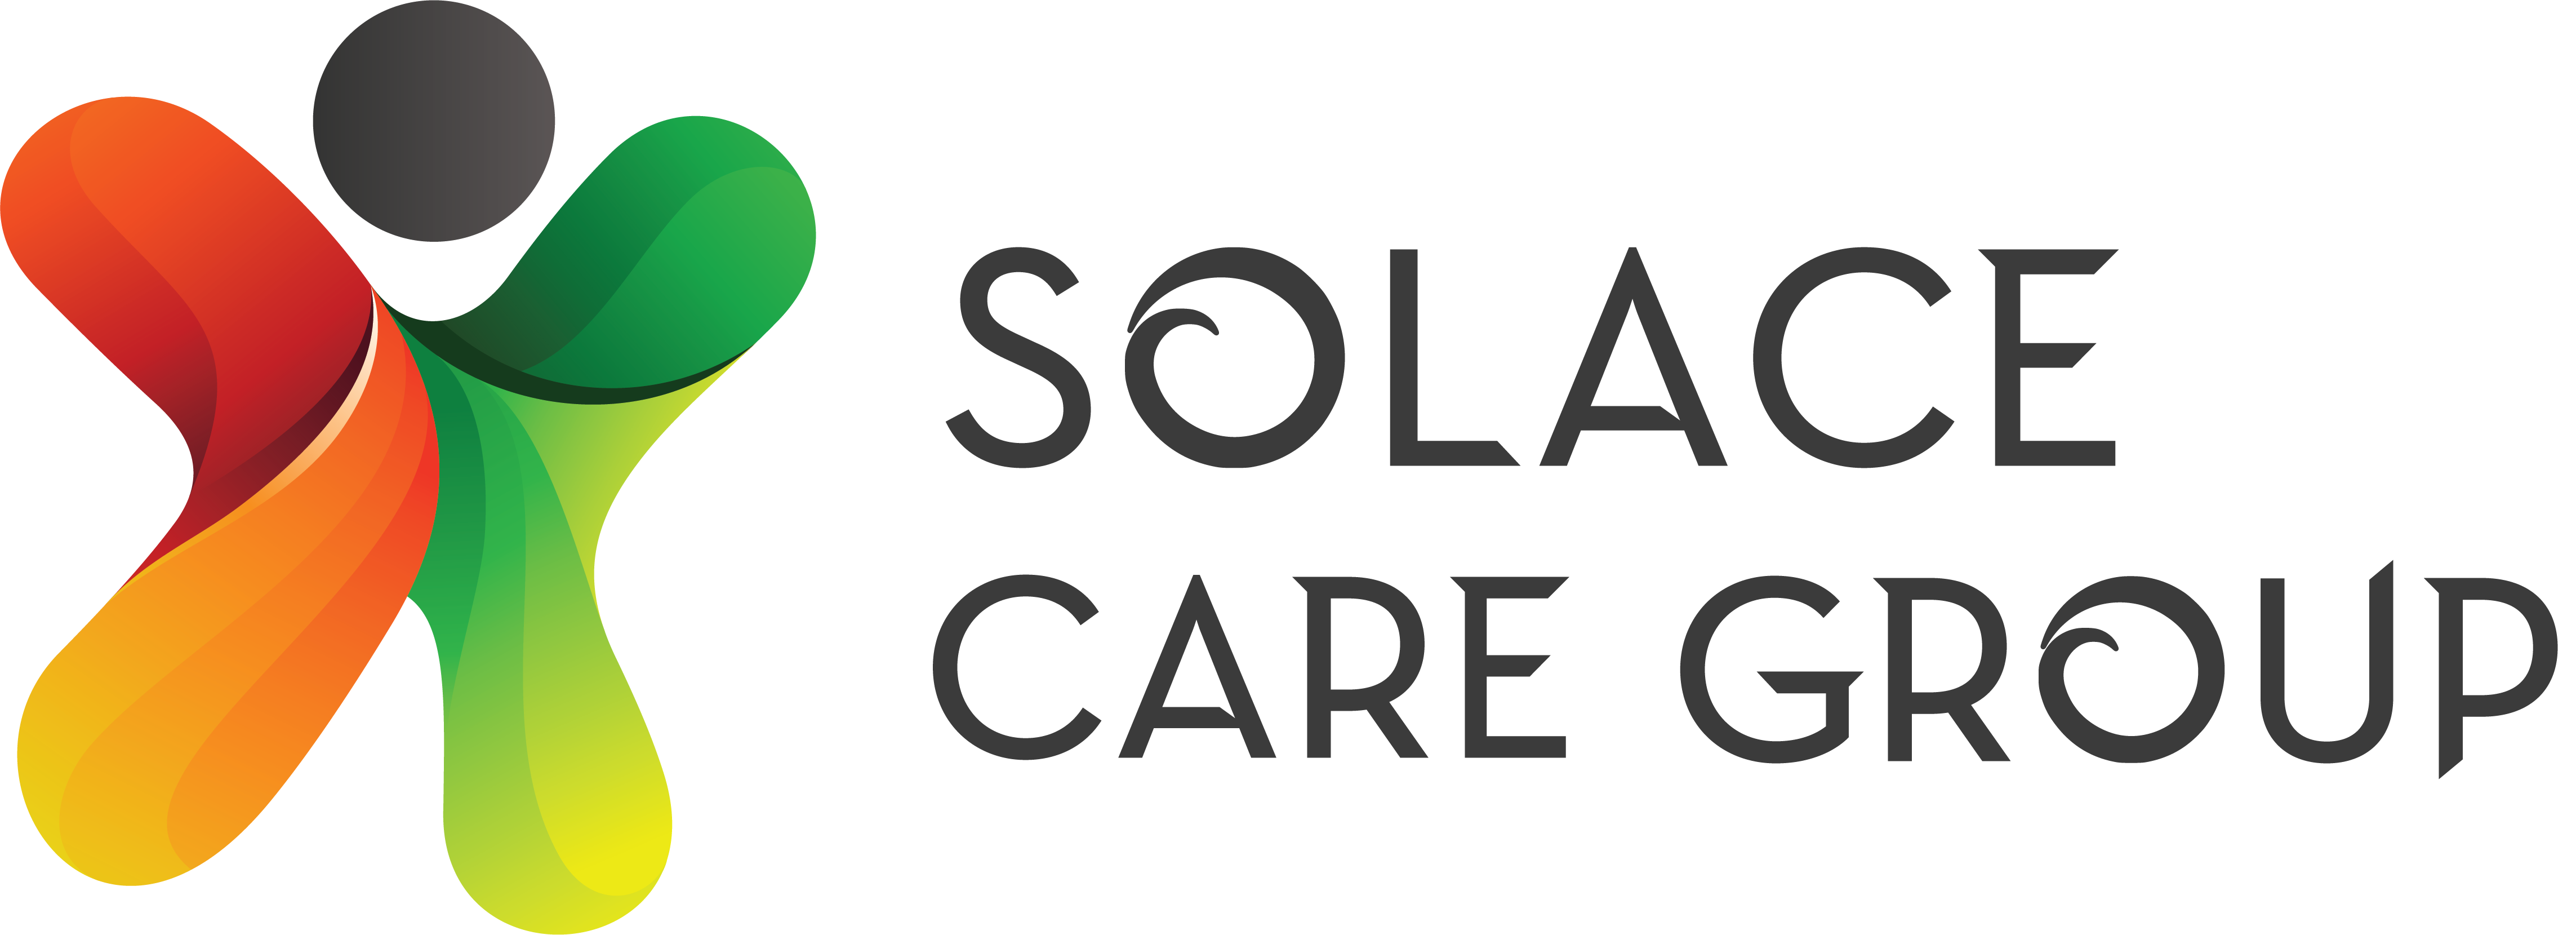 Solace Care Group